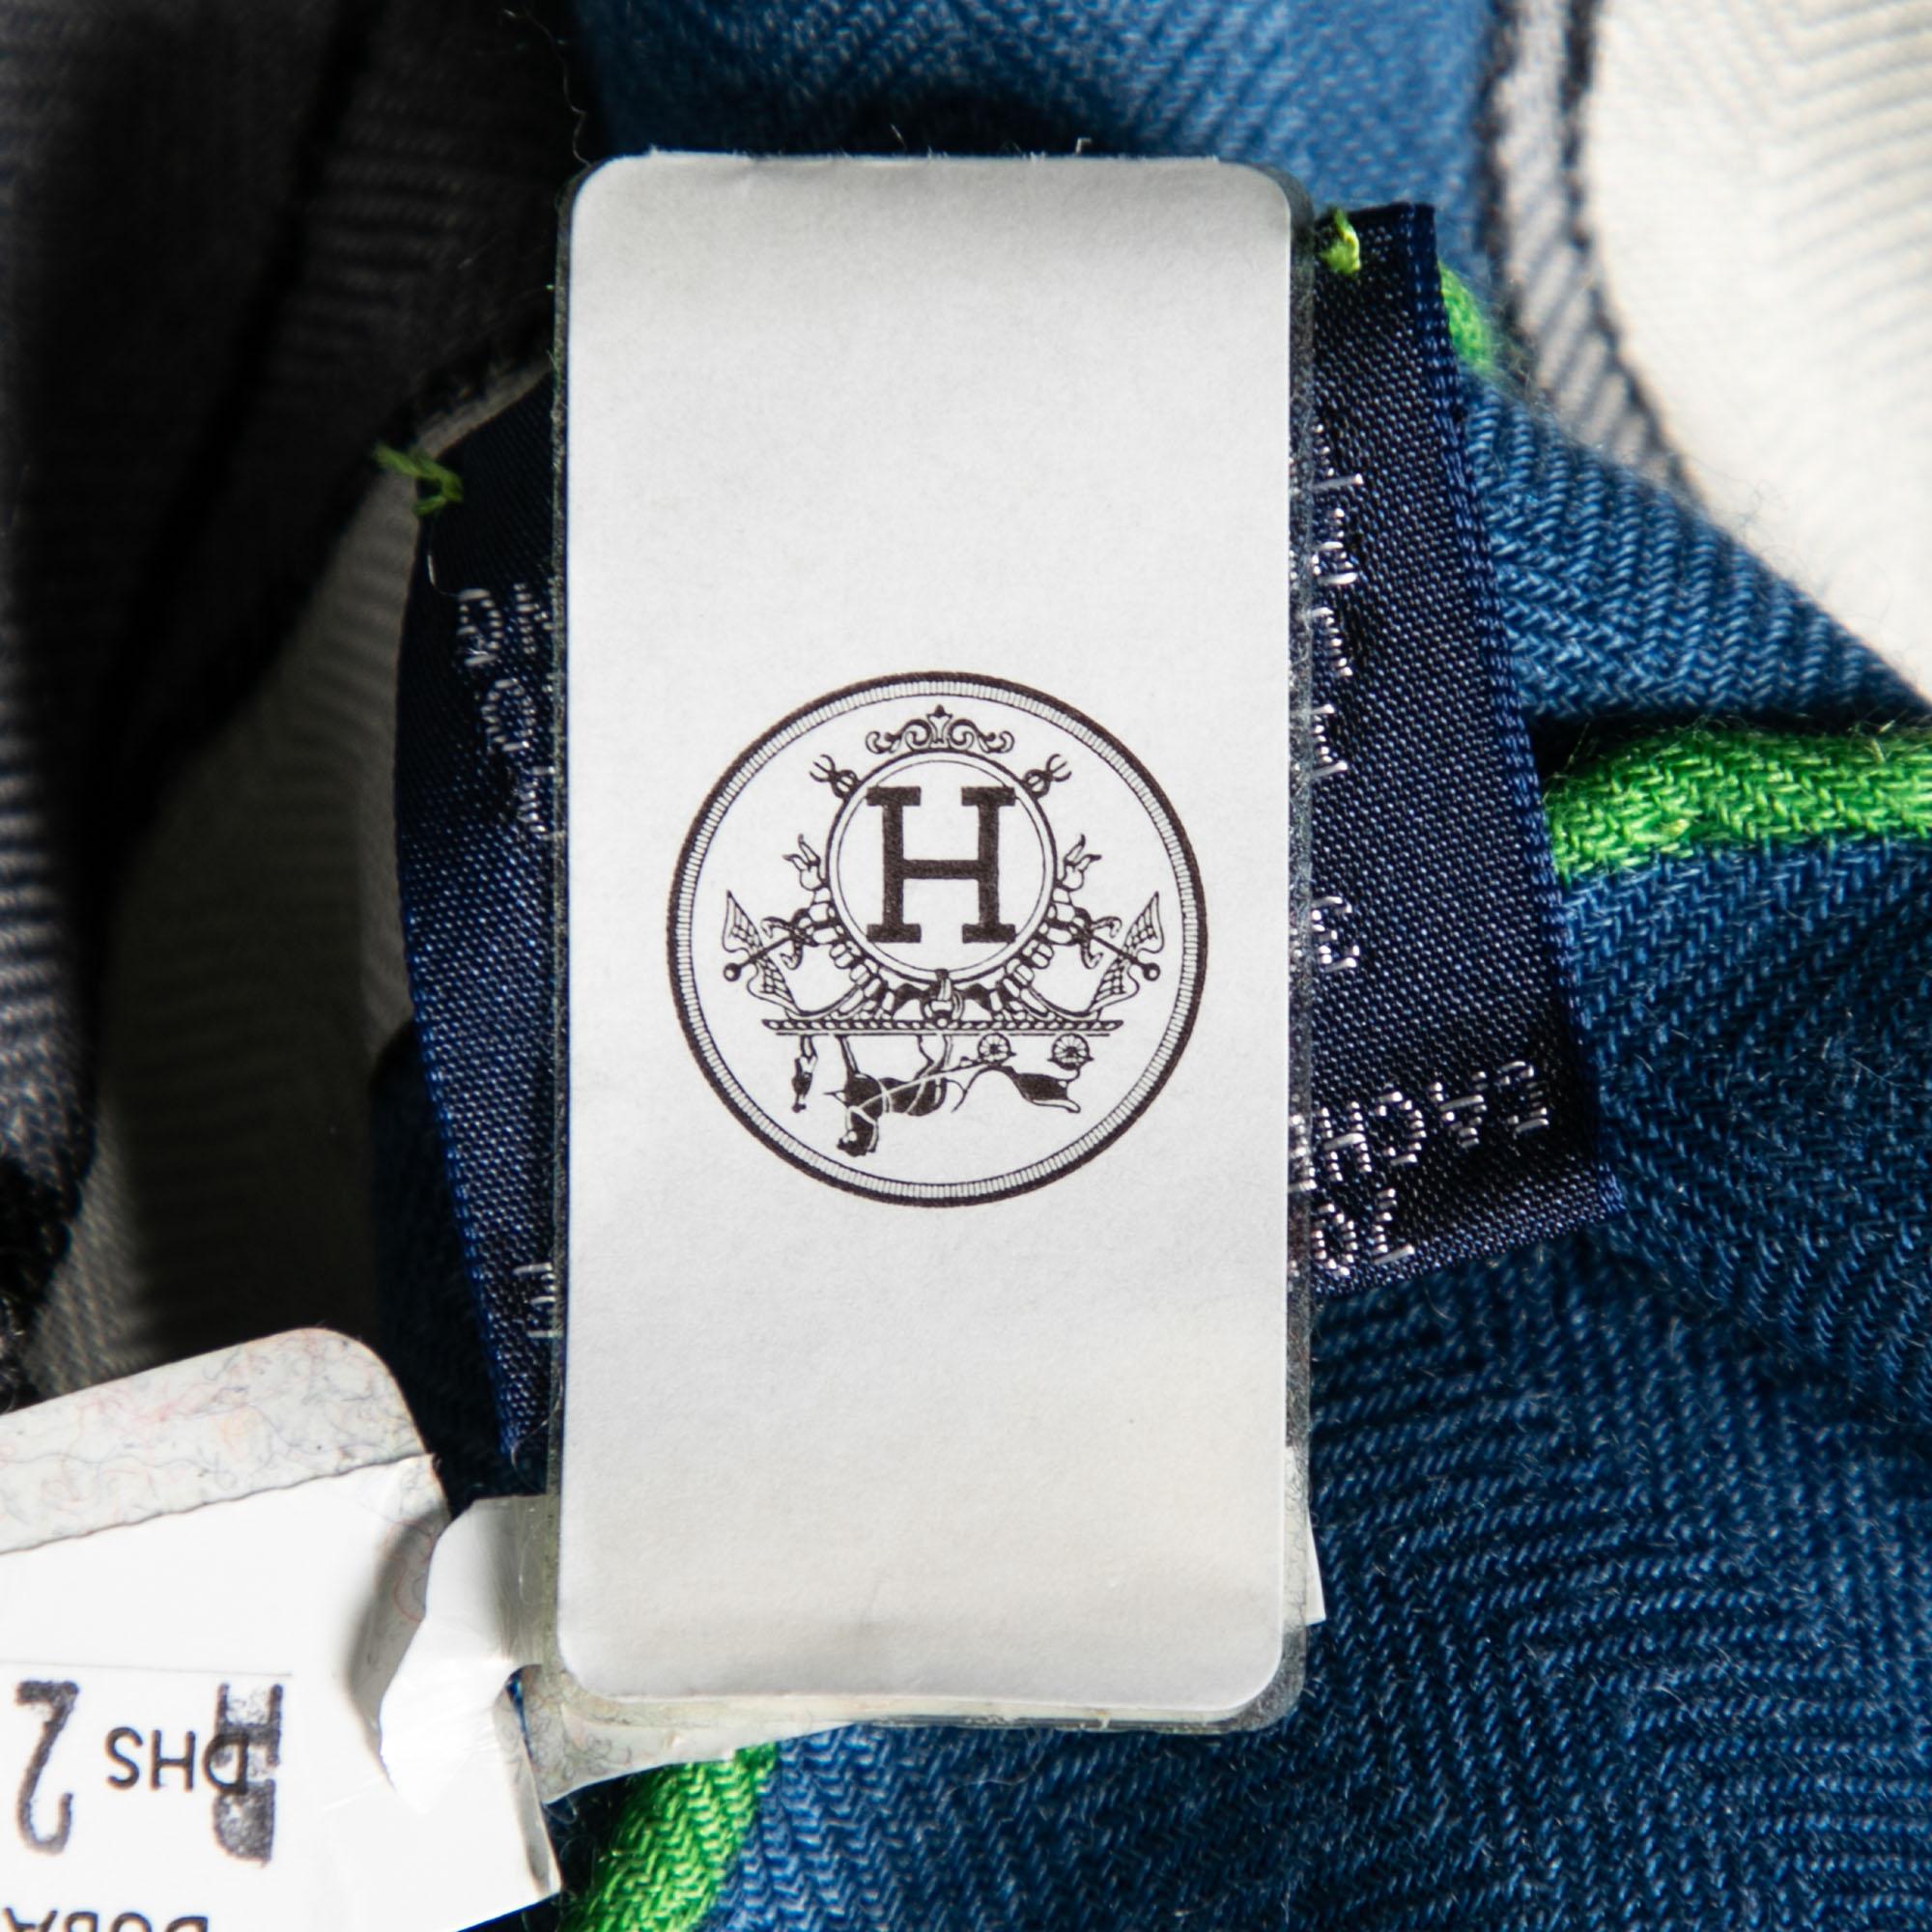 An essential Hermès accessory, the label's scarves are as iconic as any other creation from the brand and are collector's favorites. This rendition is carefully cut from a luxurious silk blend and designed with the Tête-à-Tête Equestre print created